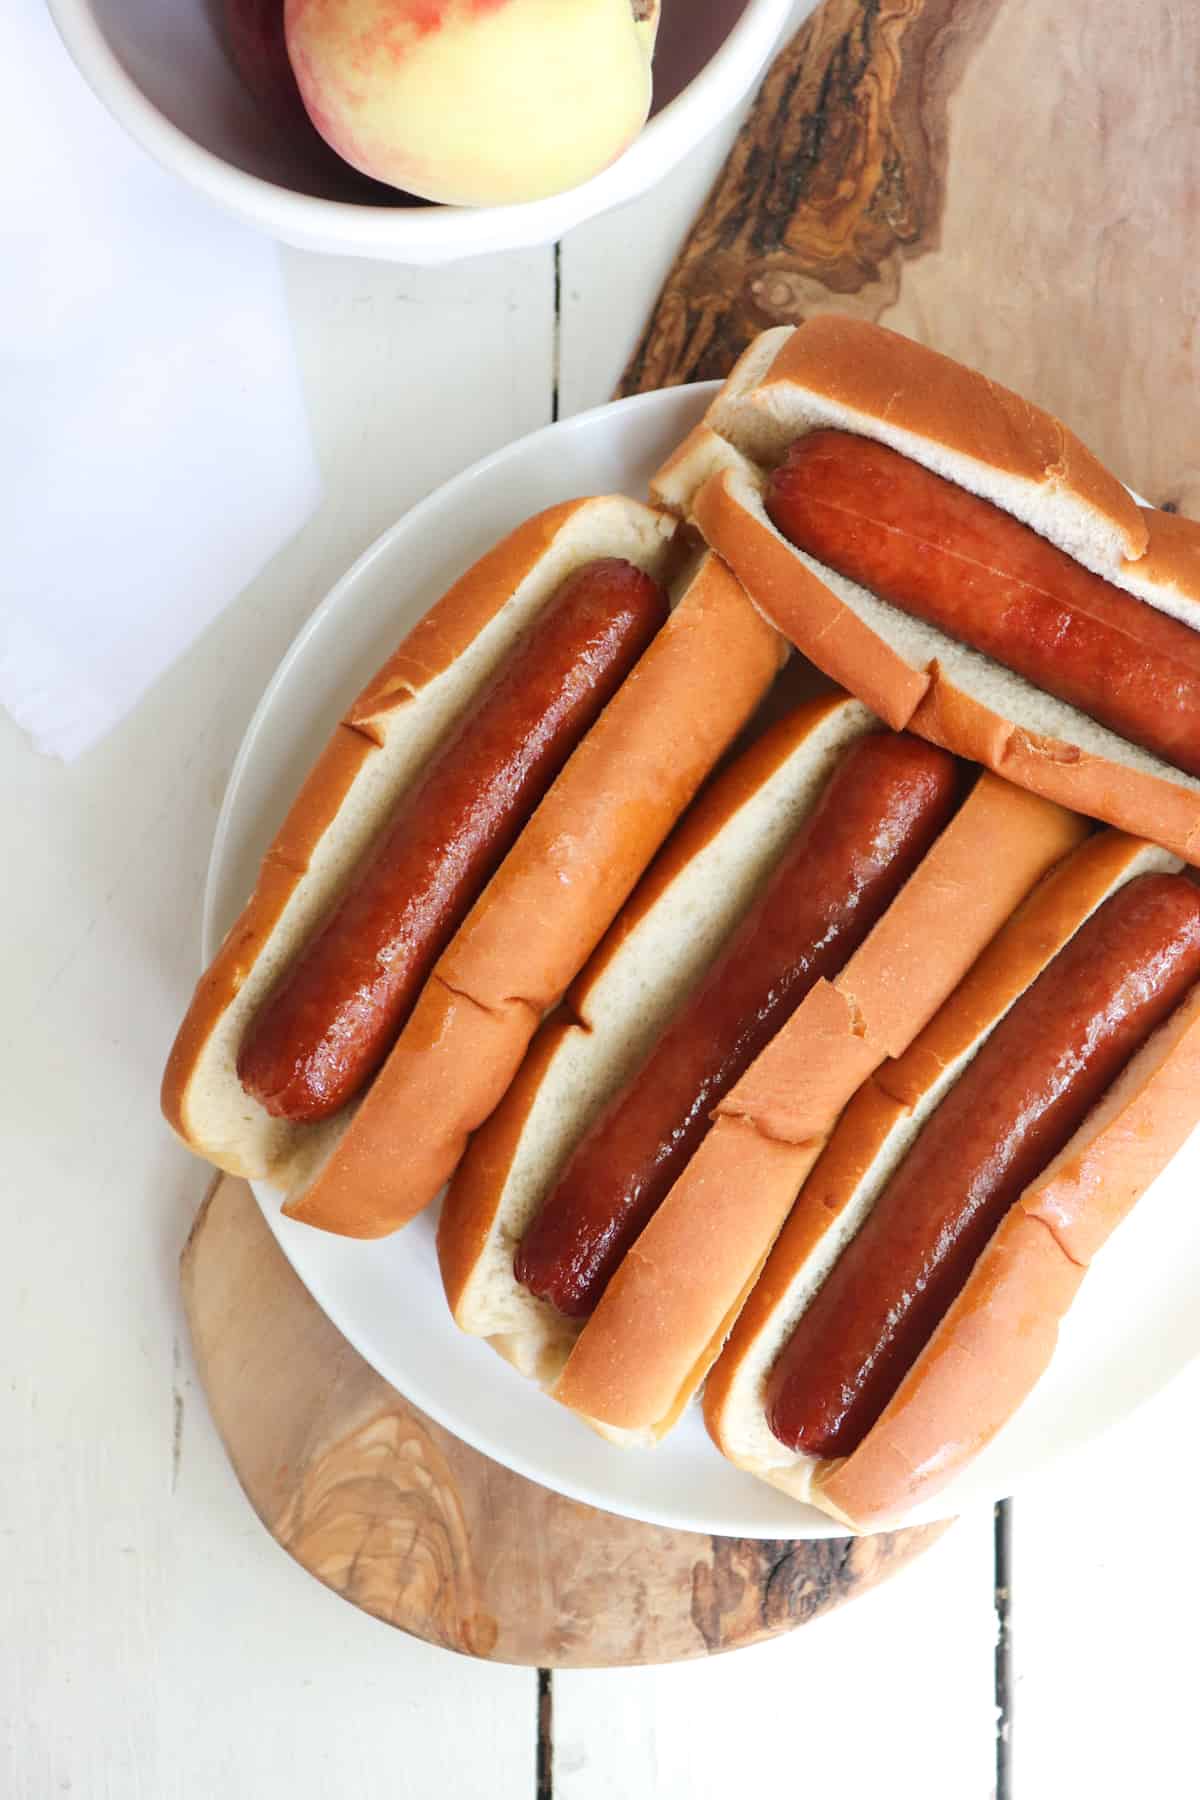 four air fried hot dogs on a white plate with peaches to the side.